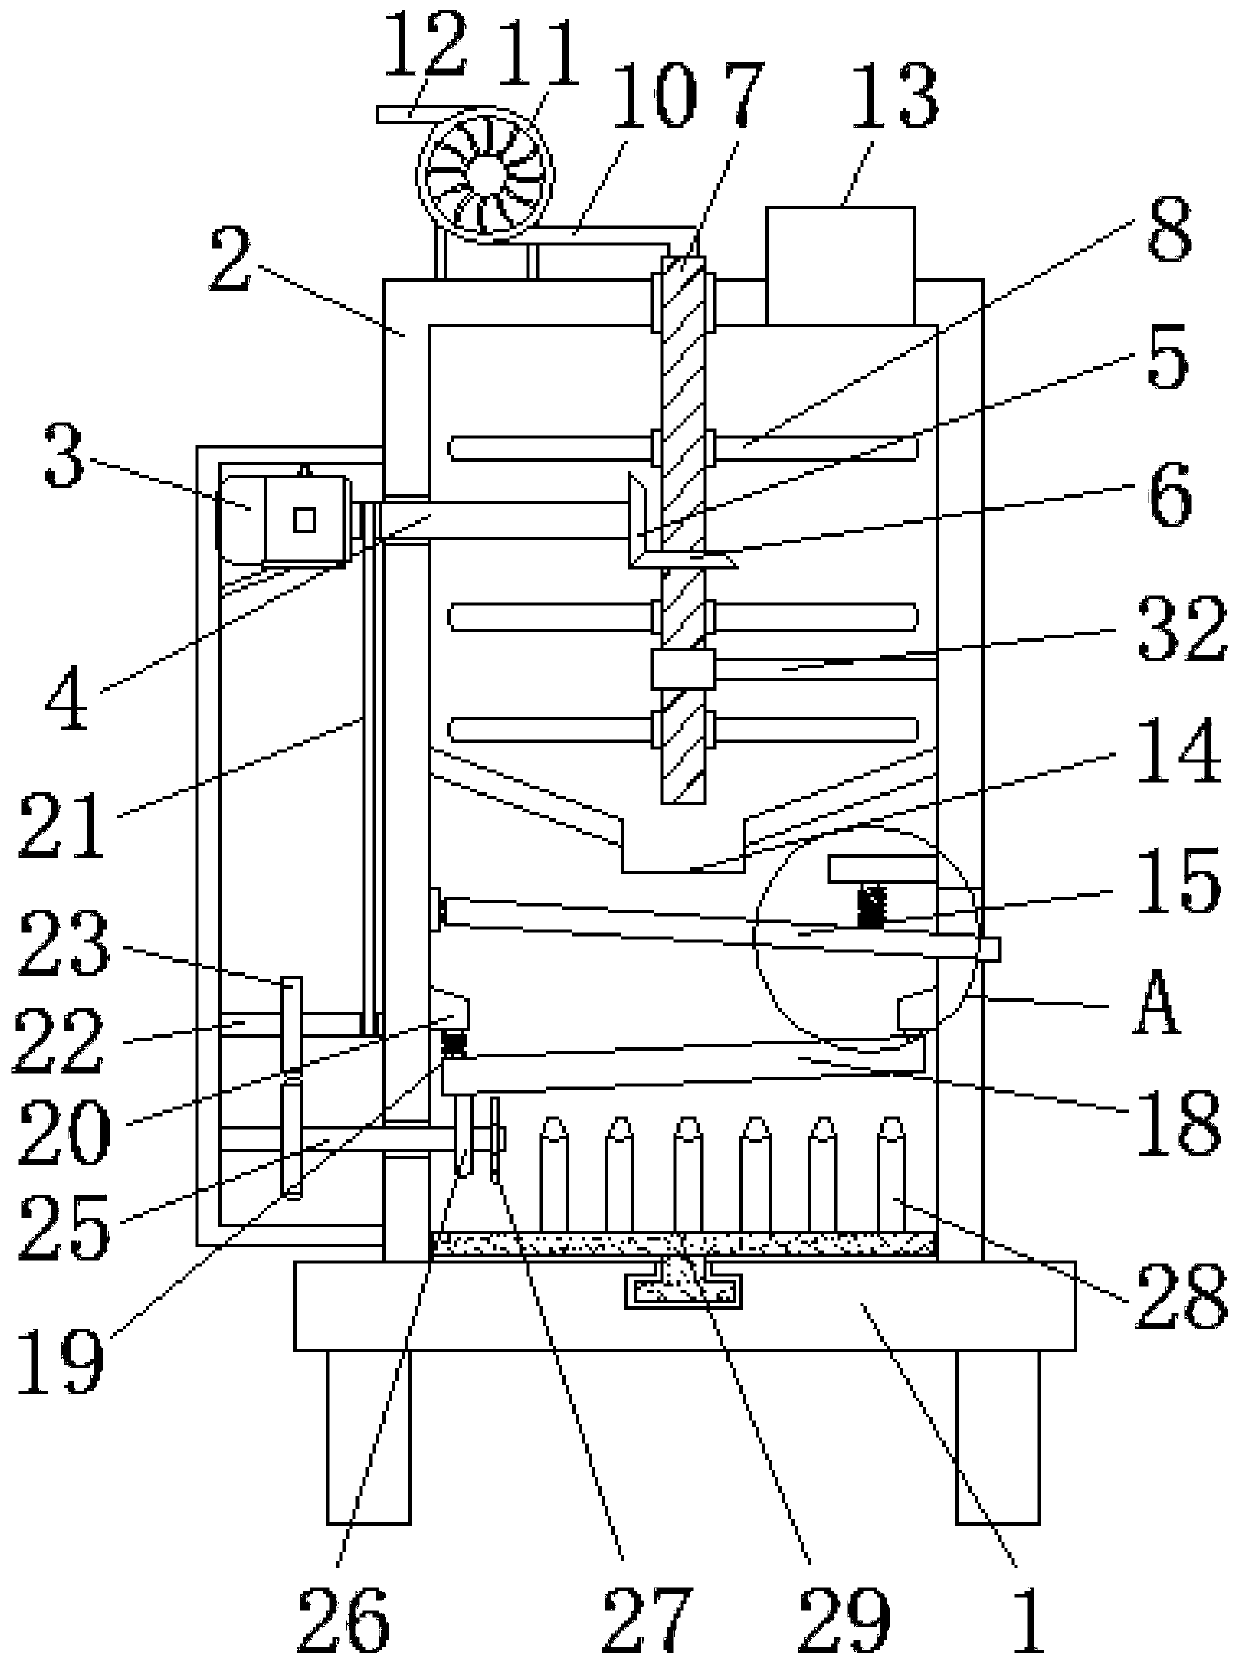 Coal briquette sorting device capable of removing impurities for coal mine processing